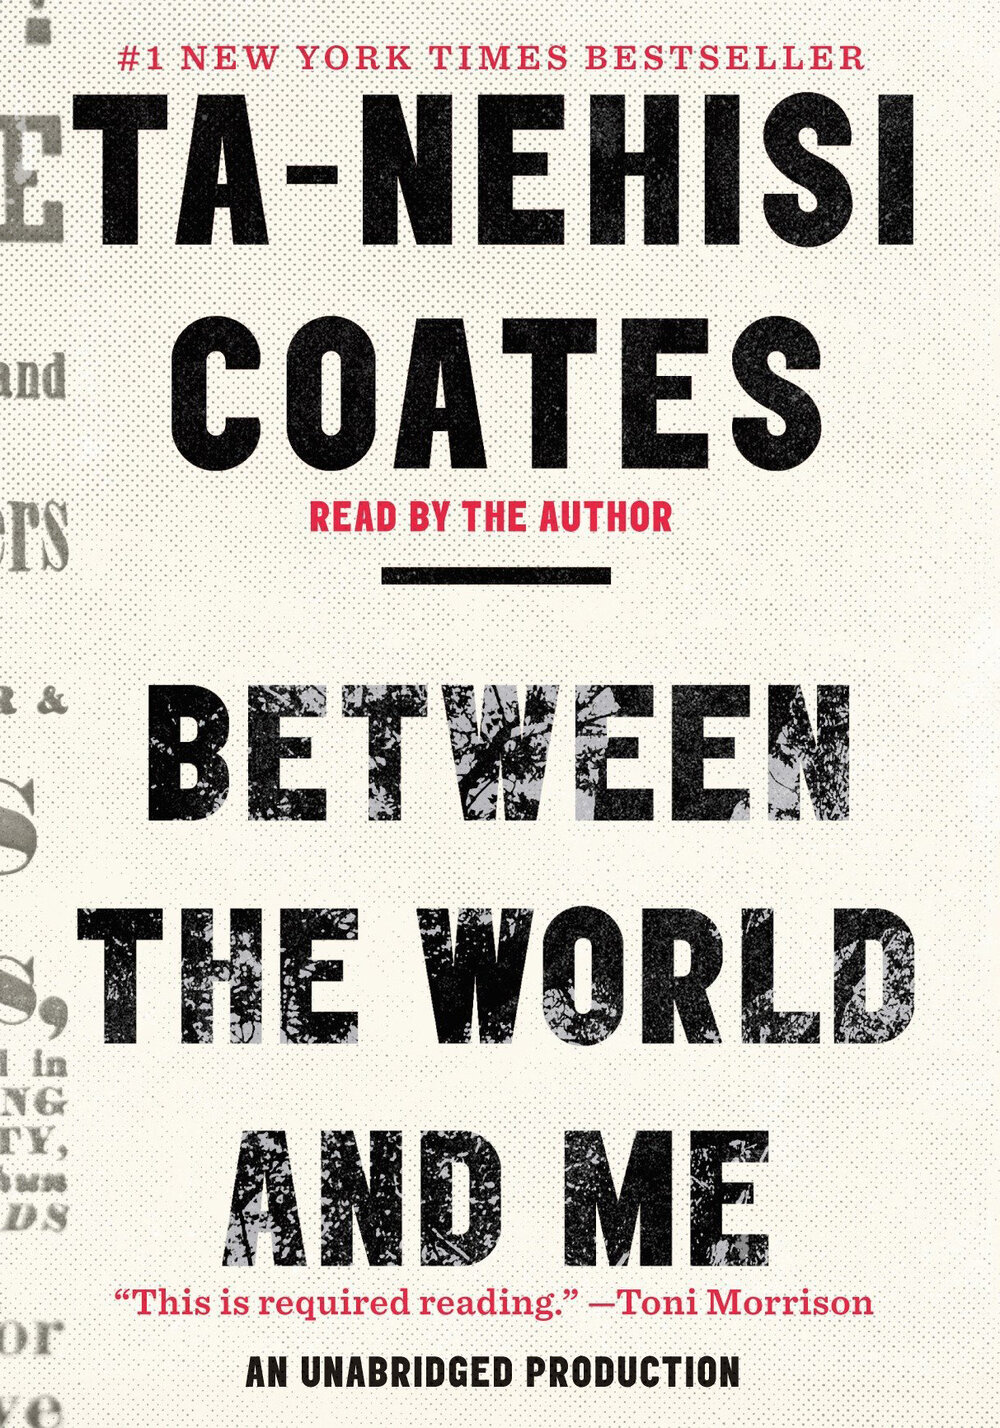 between-the-world-and-me-by-ta-nehisi-coates-pdf-4.jpg